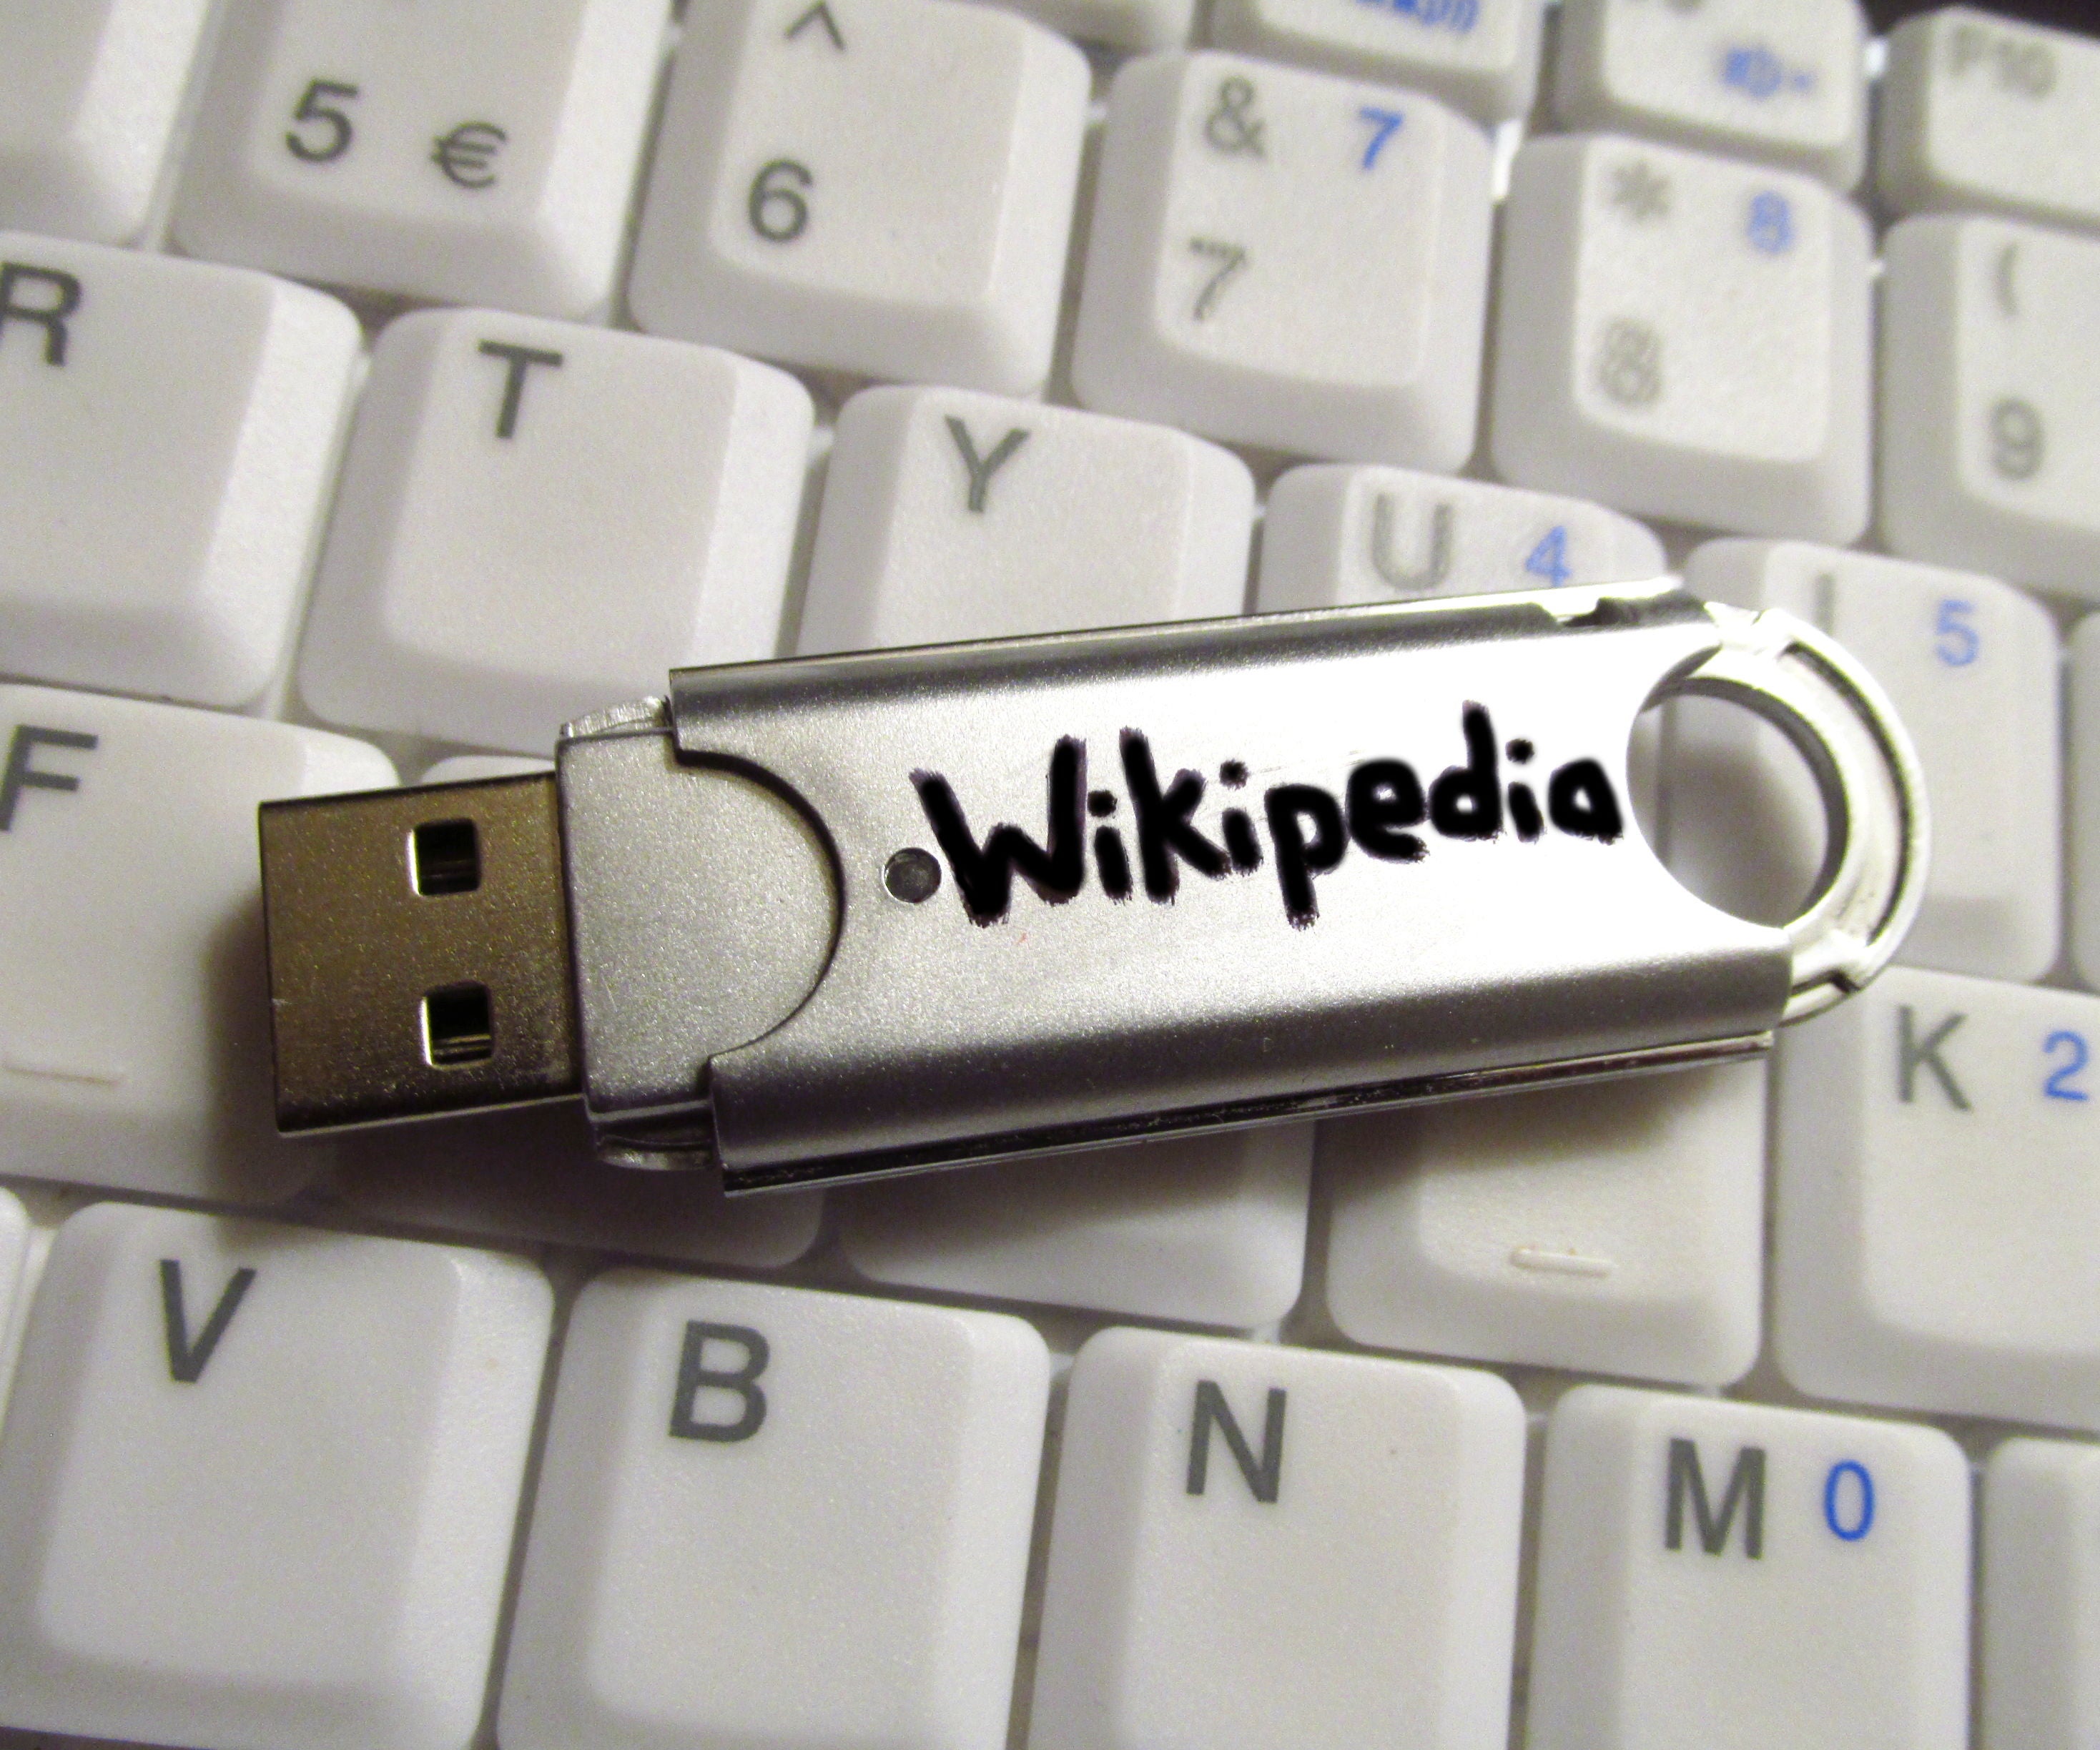 Download Wikipedia for Offline Use